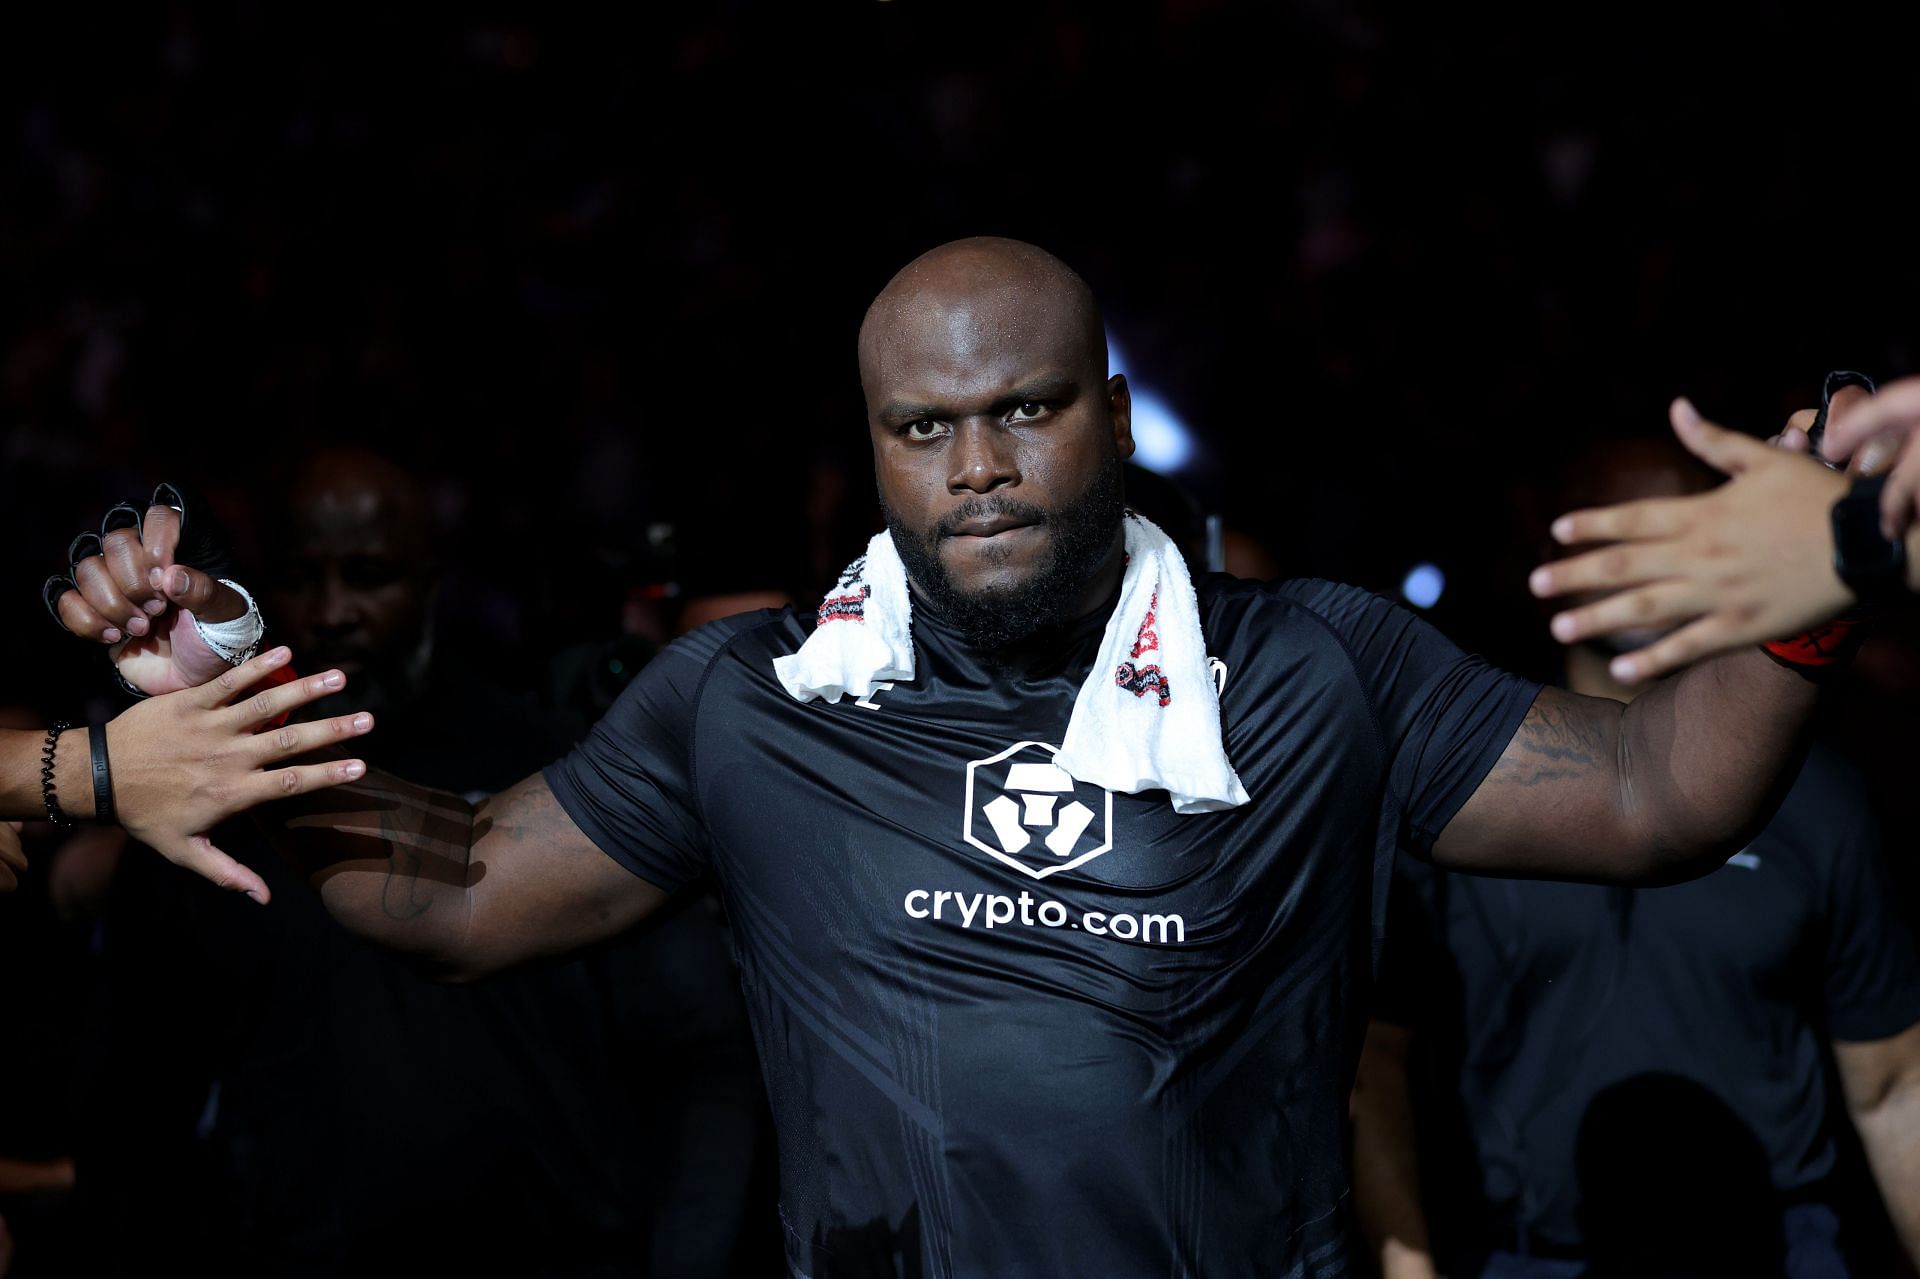 Derrick Lewis will be hopeful of a big knockout win this weekend